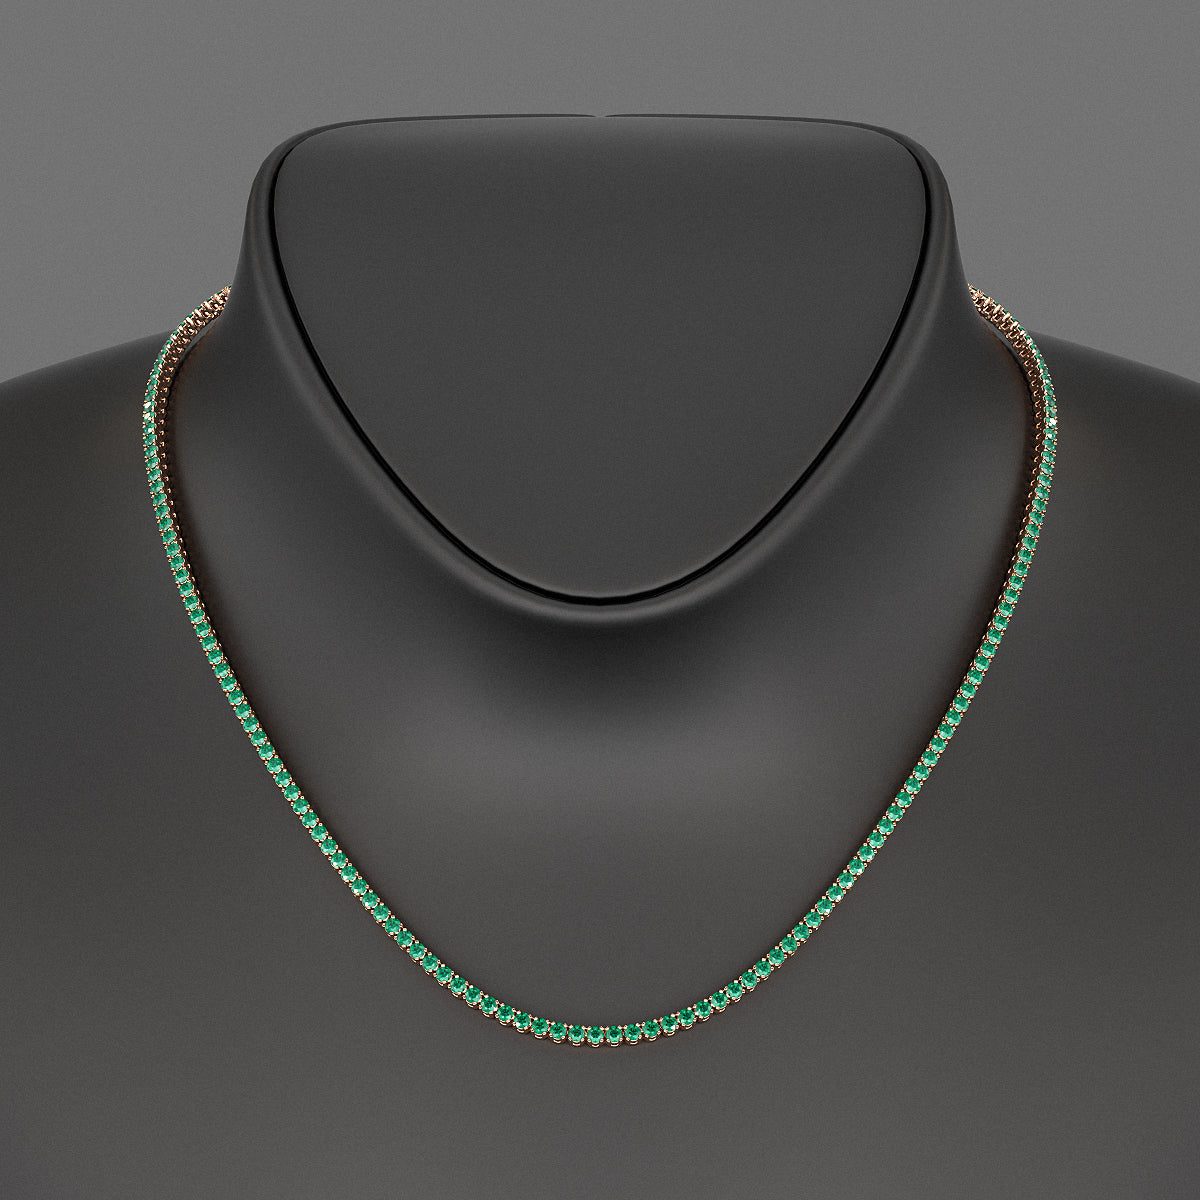 Natural Zambian Green Emerald Tennis Necklace in 14K/18K White Gold